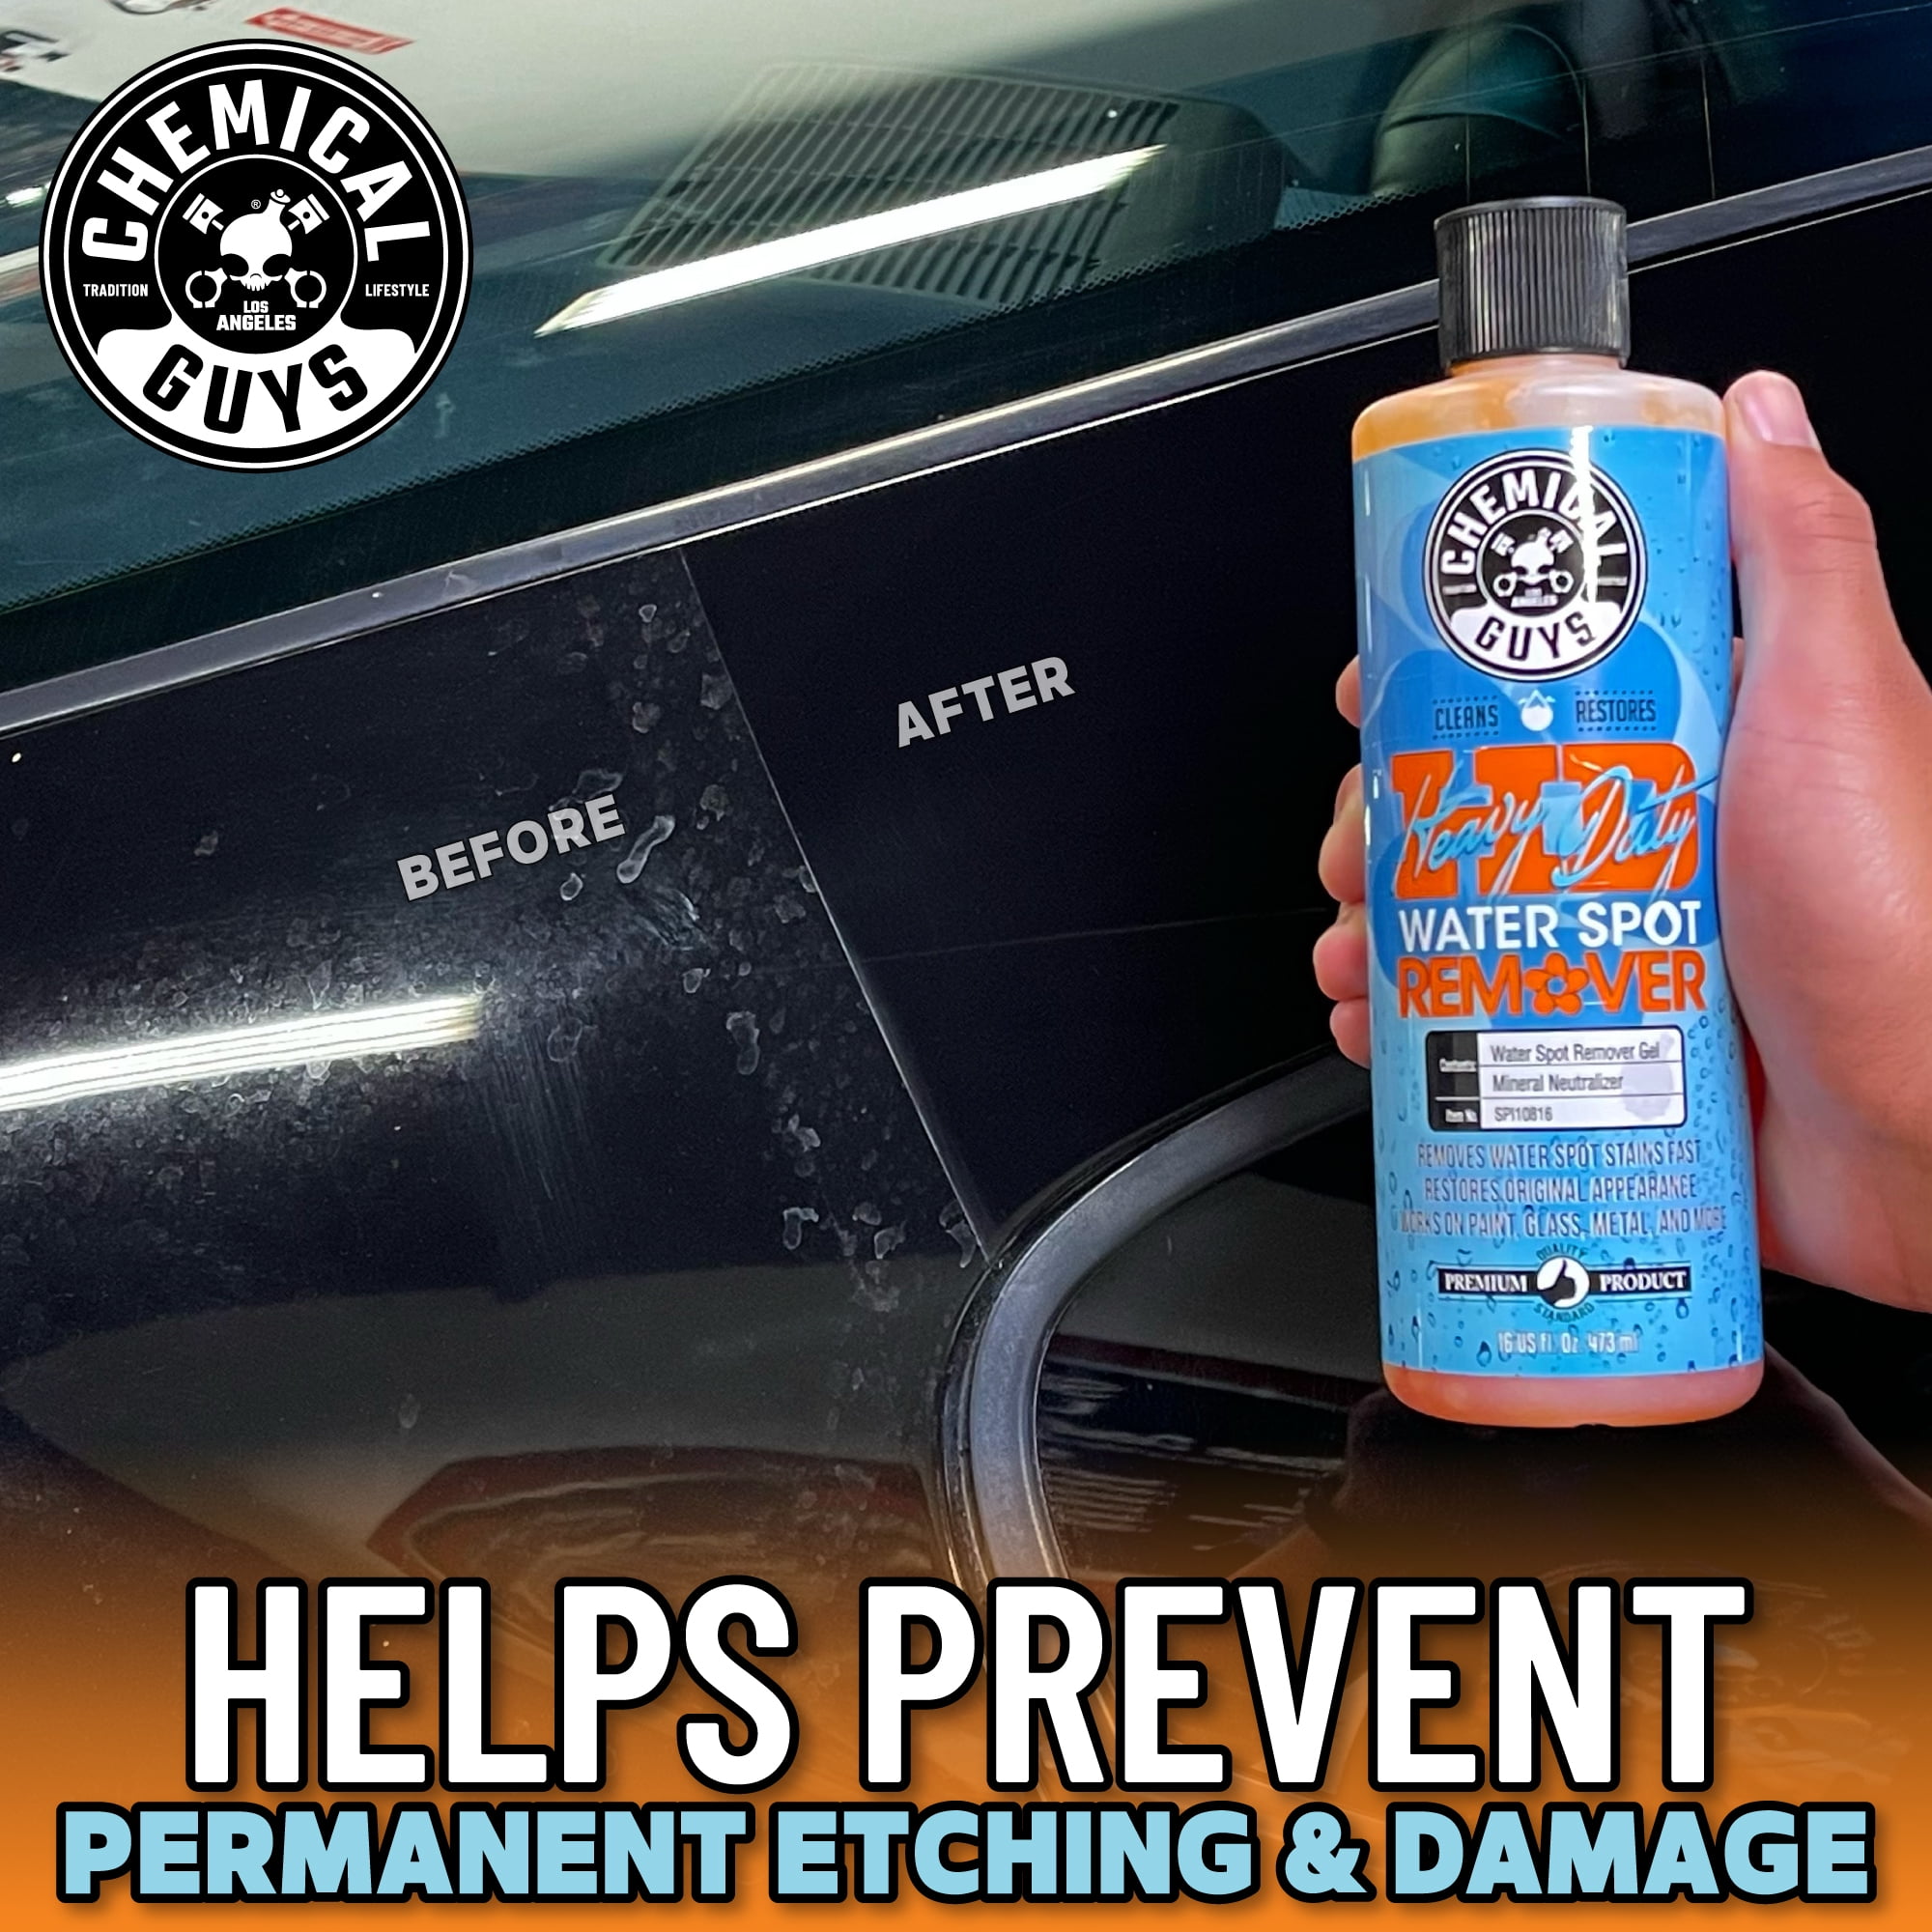 Chemical Guys - Eliminate water spots with ease with Heavy Duty Water Spot  Remover Gel! 💦 Did those pesky sprinklers get you again? Don't let those  water spots ruin the look of